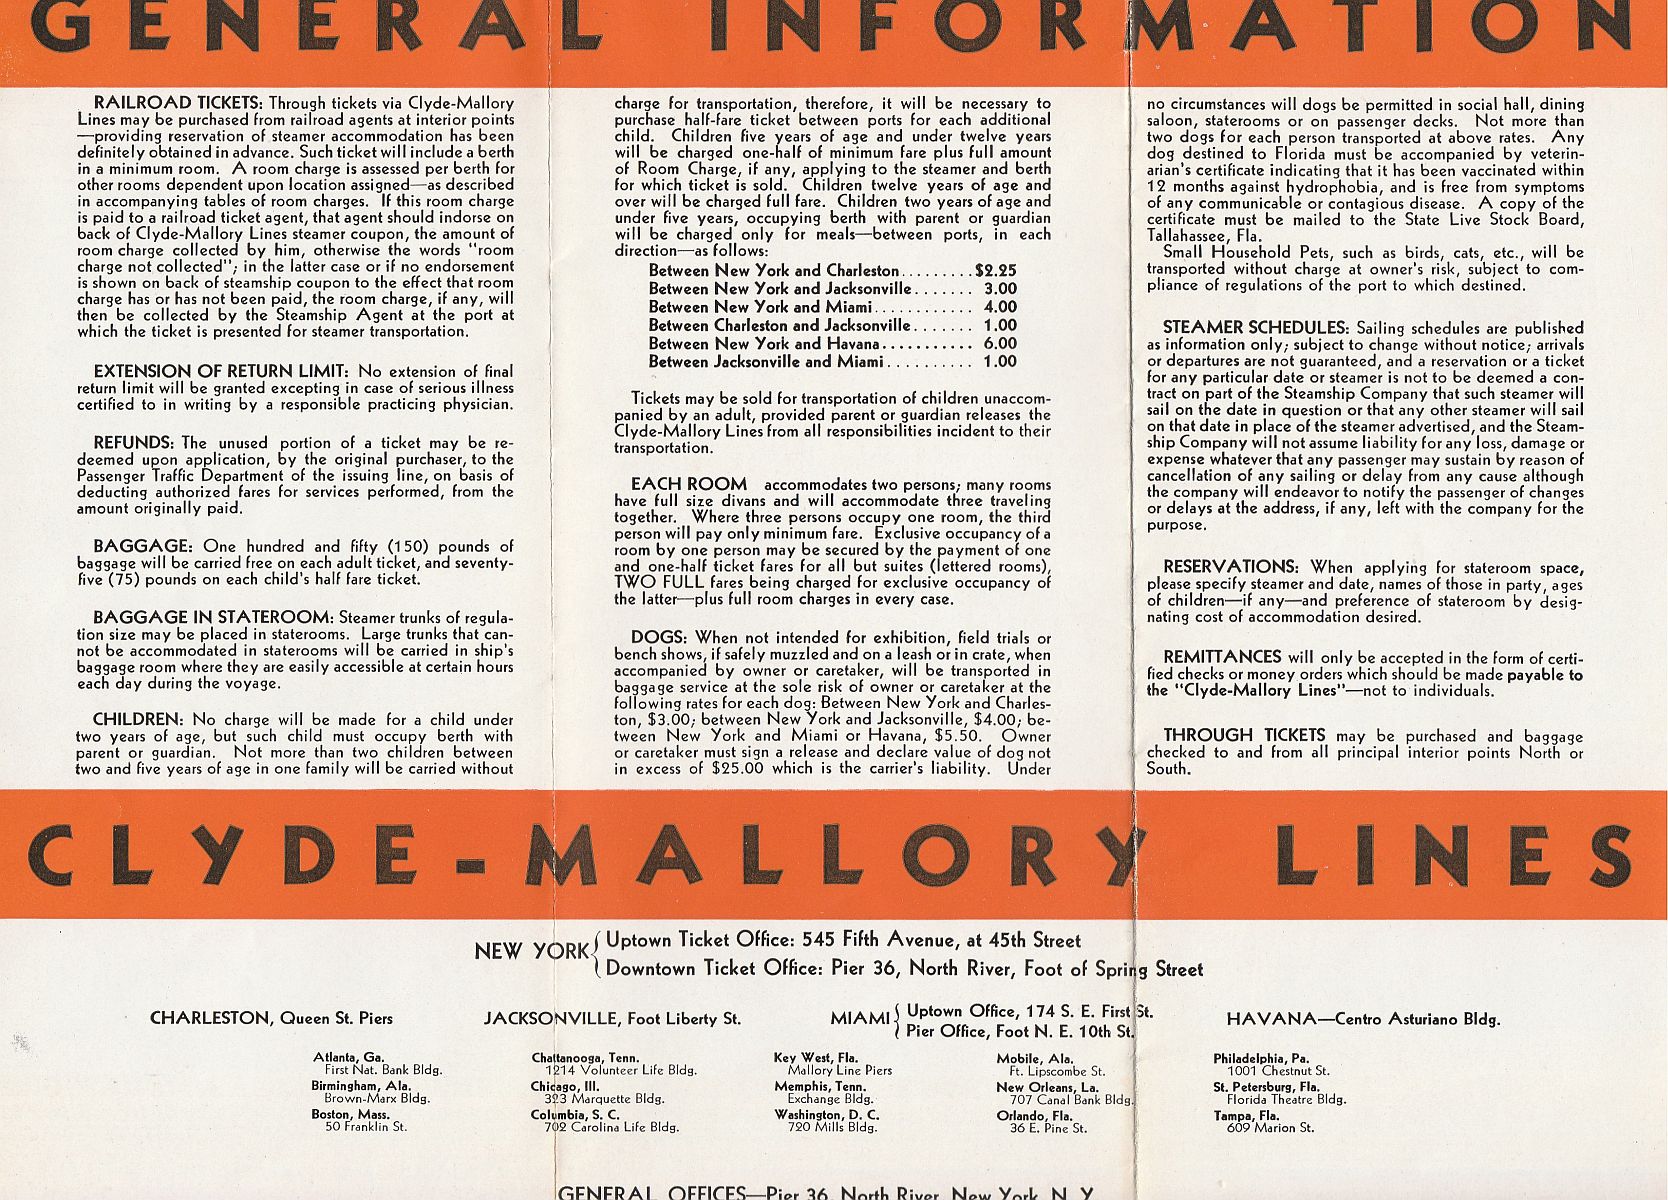 Clyde-Mallory Lines General Information: About fares, tickets, schedules & offices